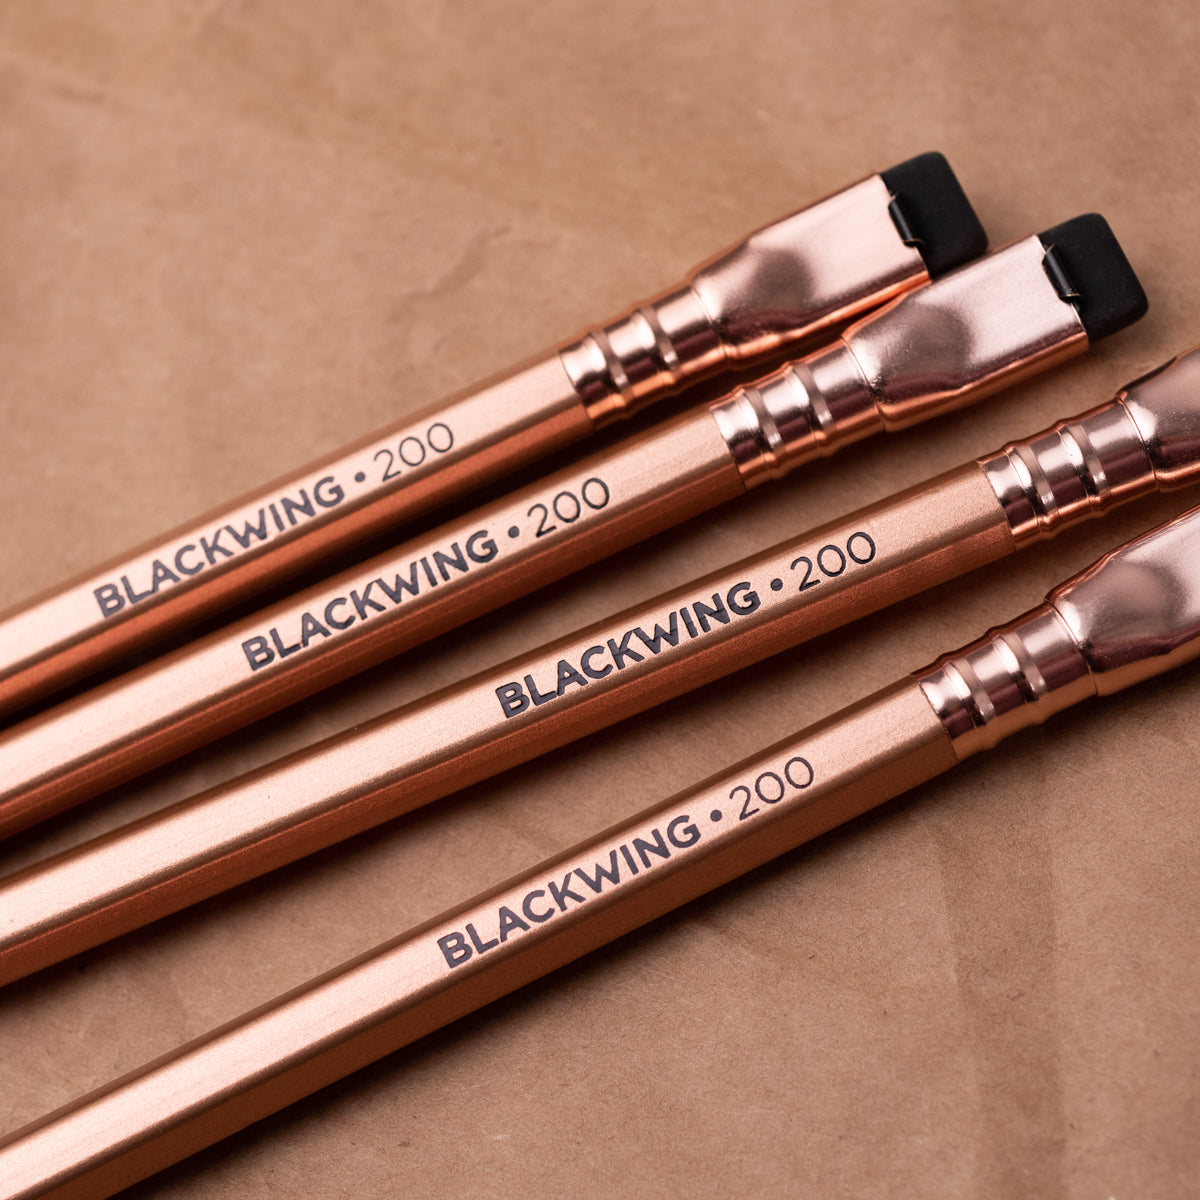 A set of Blackwing Volume 200 (Set of 12) pencils resting on a brown paper, perfect for sparking creativity in a coffeehouse setting.